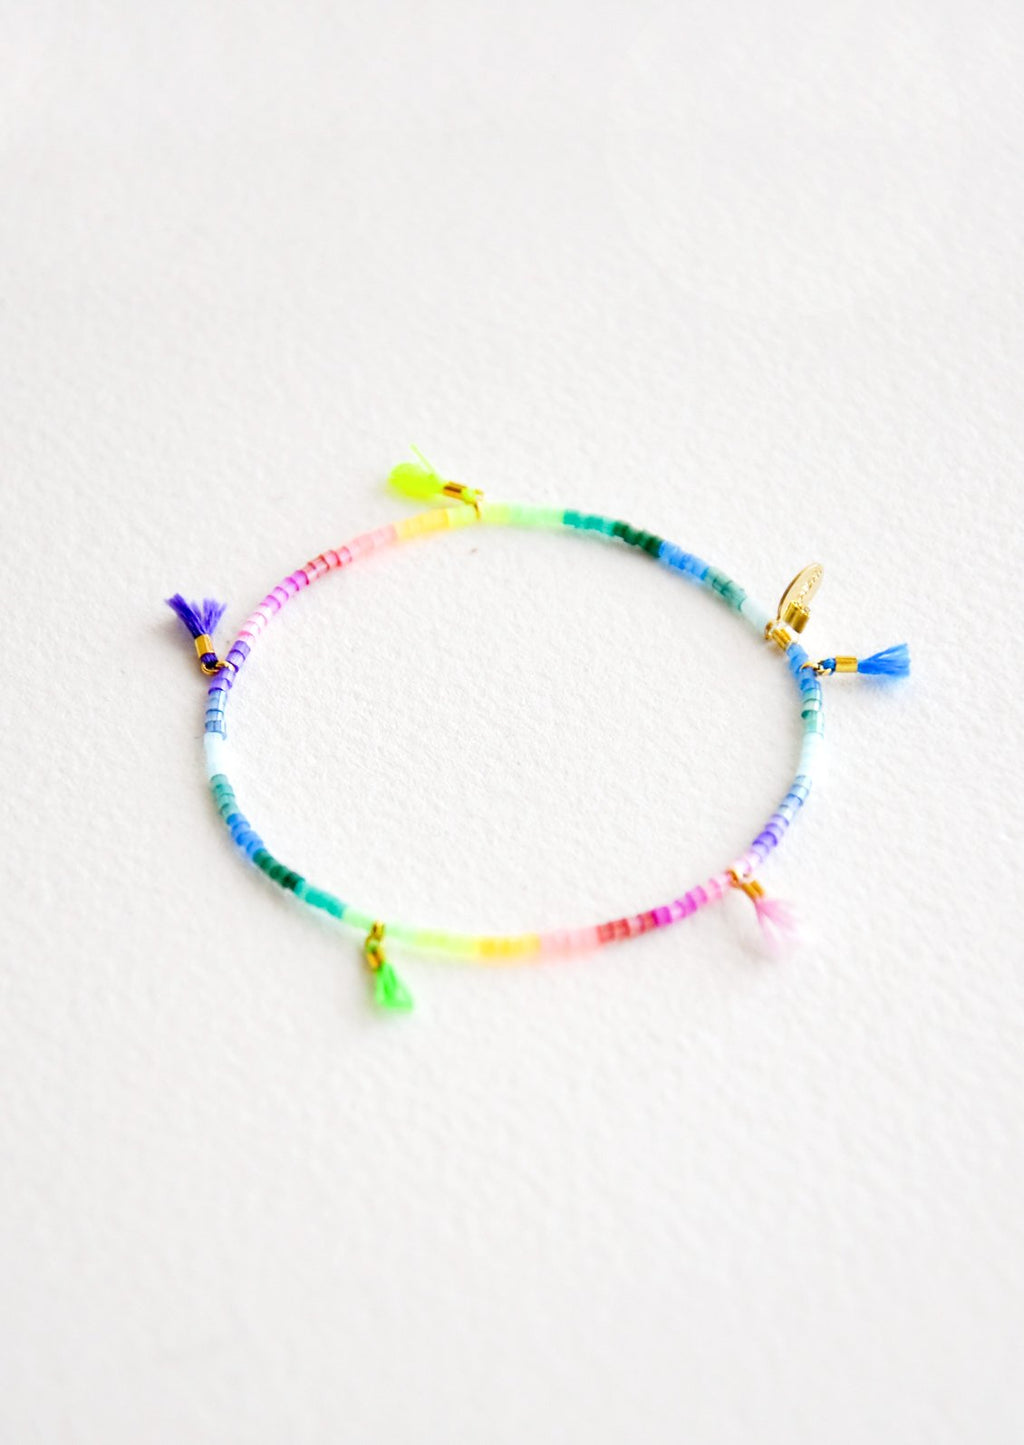 Rainbow Gradient: Bracelet featuring multicolor neon rainbow glass beads interspersed with 5 small multicolor string tassels on an elastic cord.